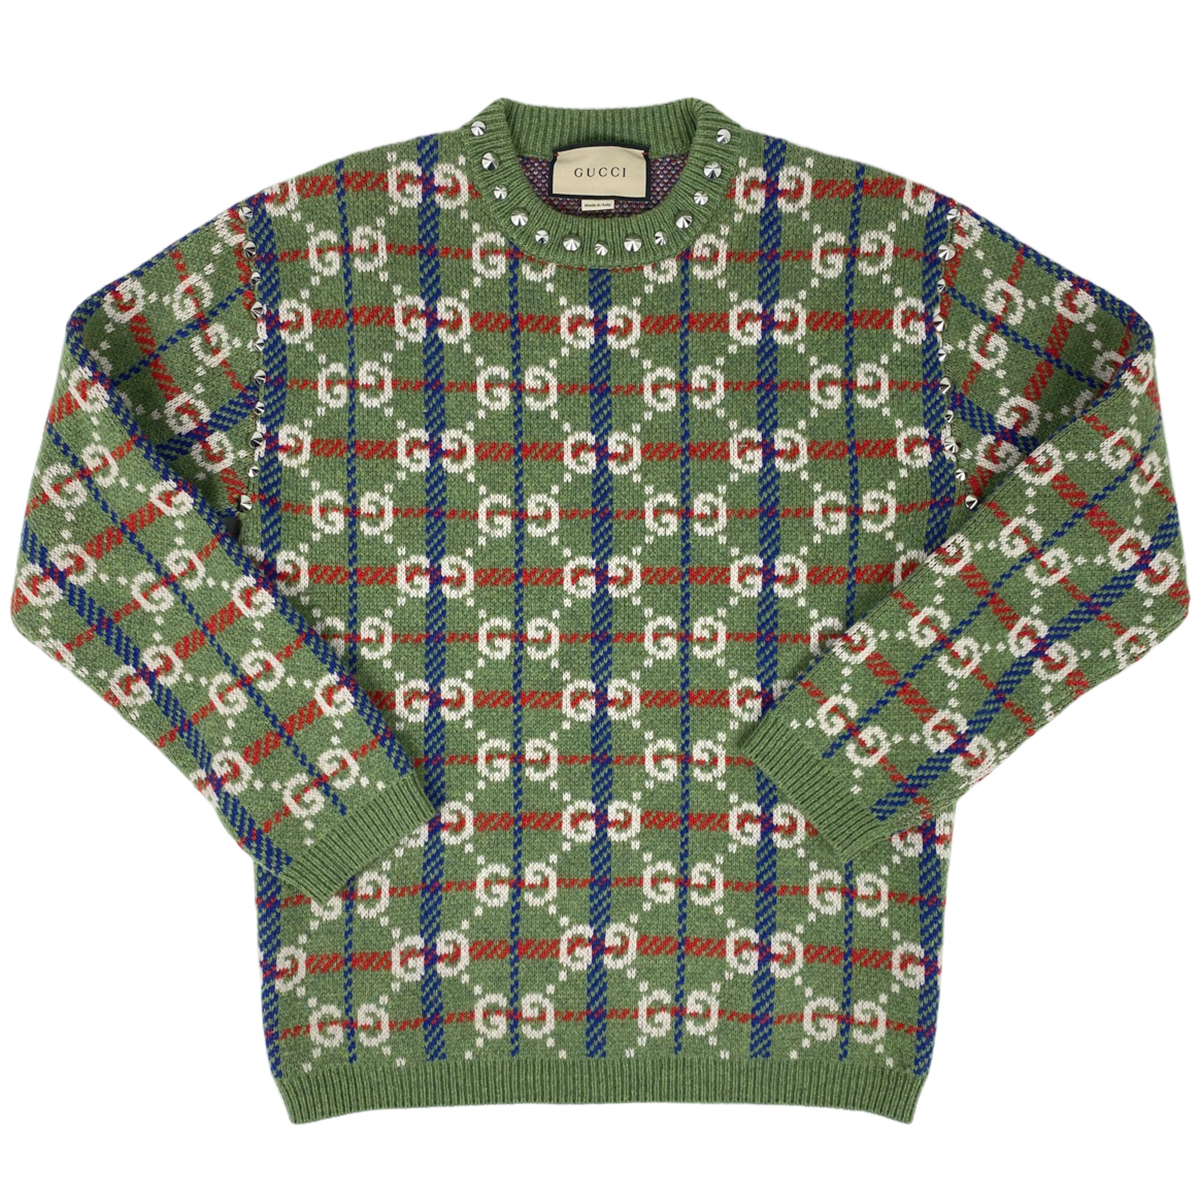  Gucci GUCCI GG pattern sweater crew neck knitted studs tops sweater wool green multicolor men's [ used ]